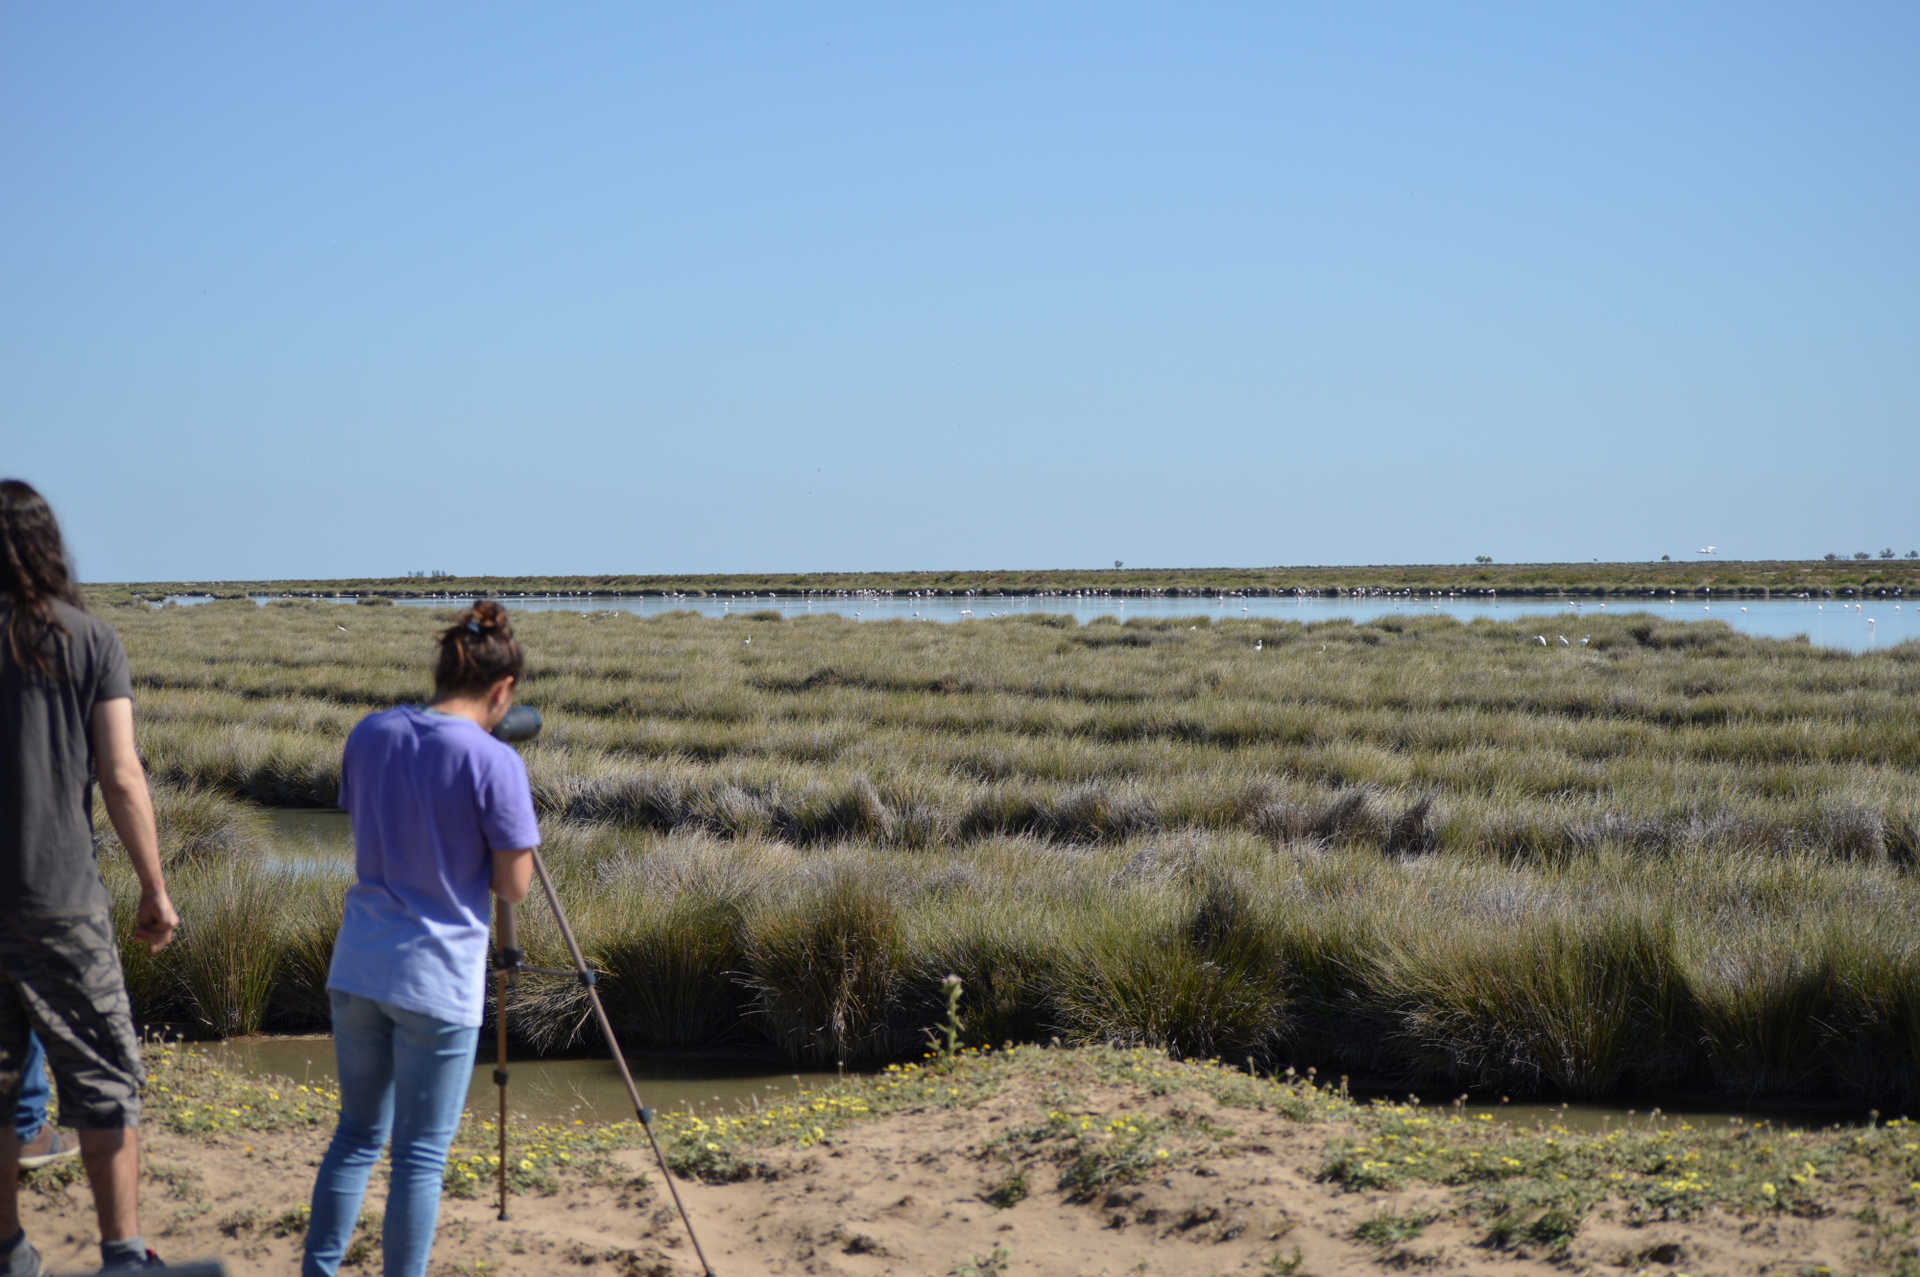 Birdwatching route through the Doñana nature reserve